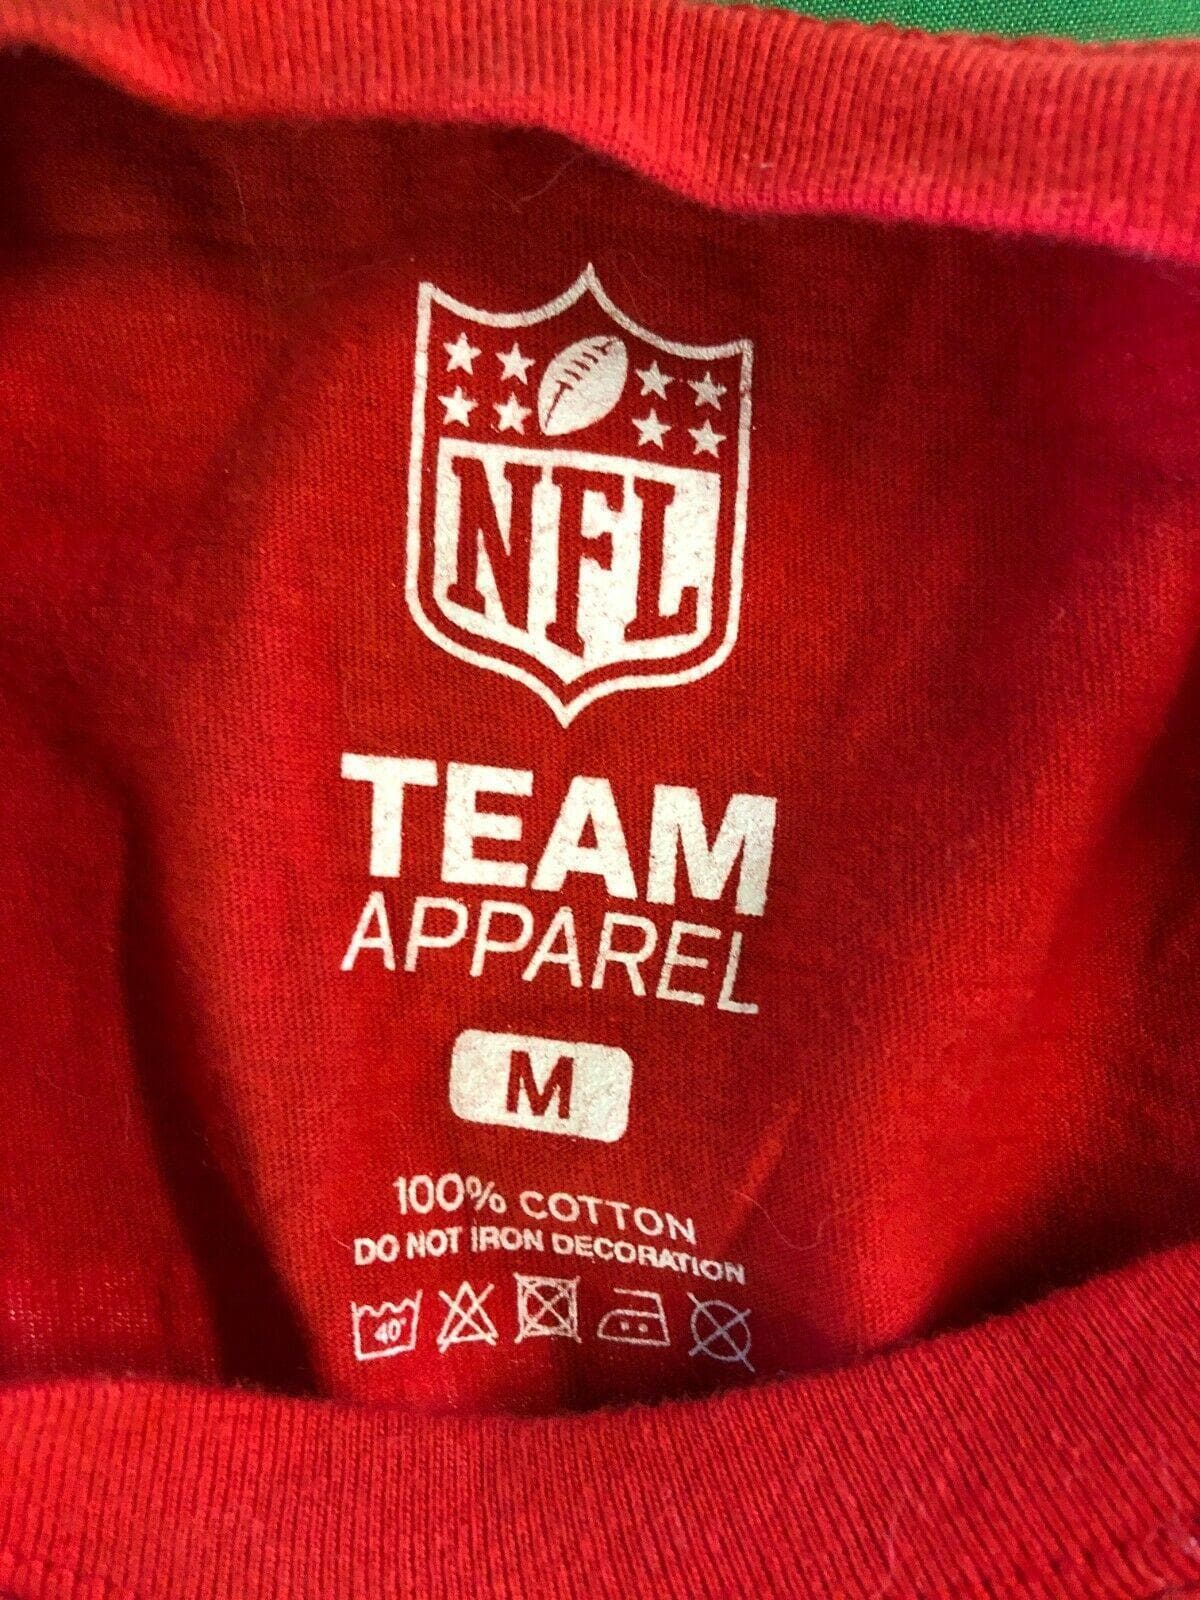 NFL Kickoff on Piccadilly 2018 Red T-Shirt Unisex Medium NWOT